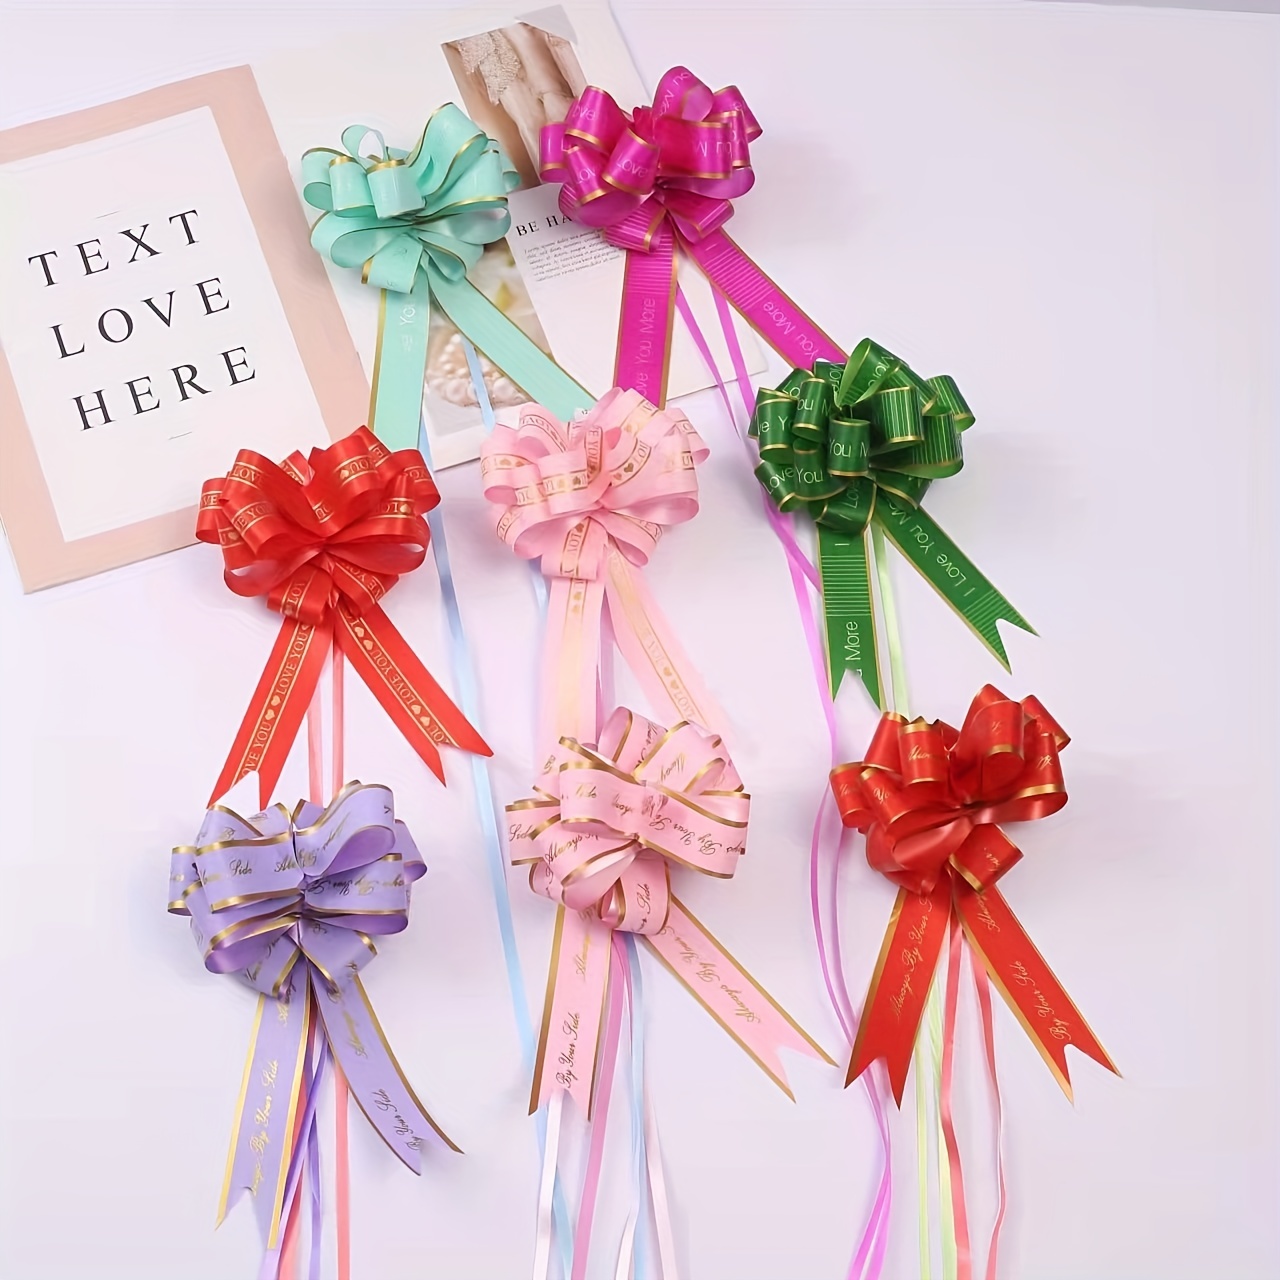 Christmas Pull Bows for Presents - 5'' Wide Gift Wrapping Bows with Ribbon  for Xmas Decoration - 10 PCS Set